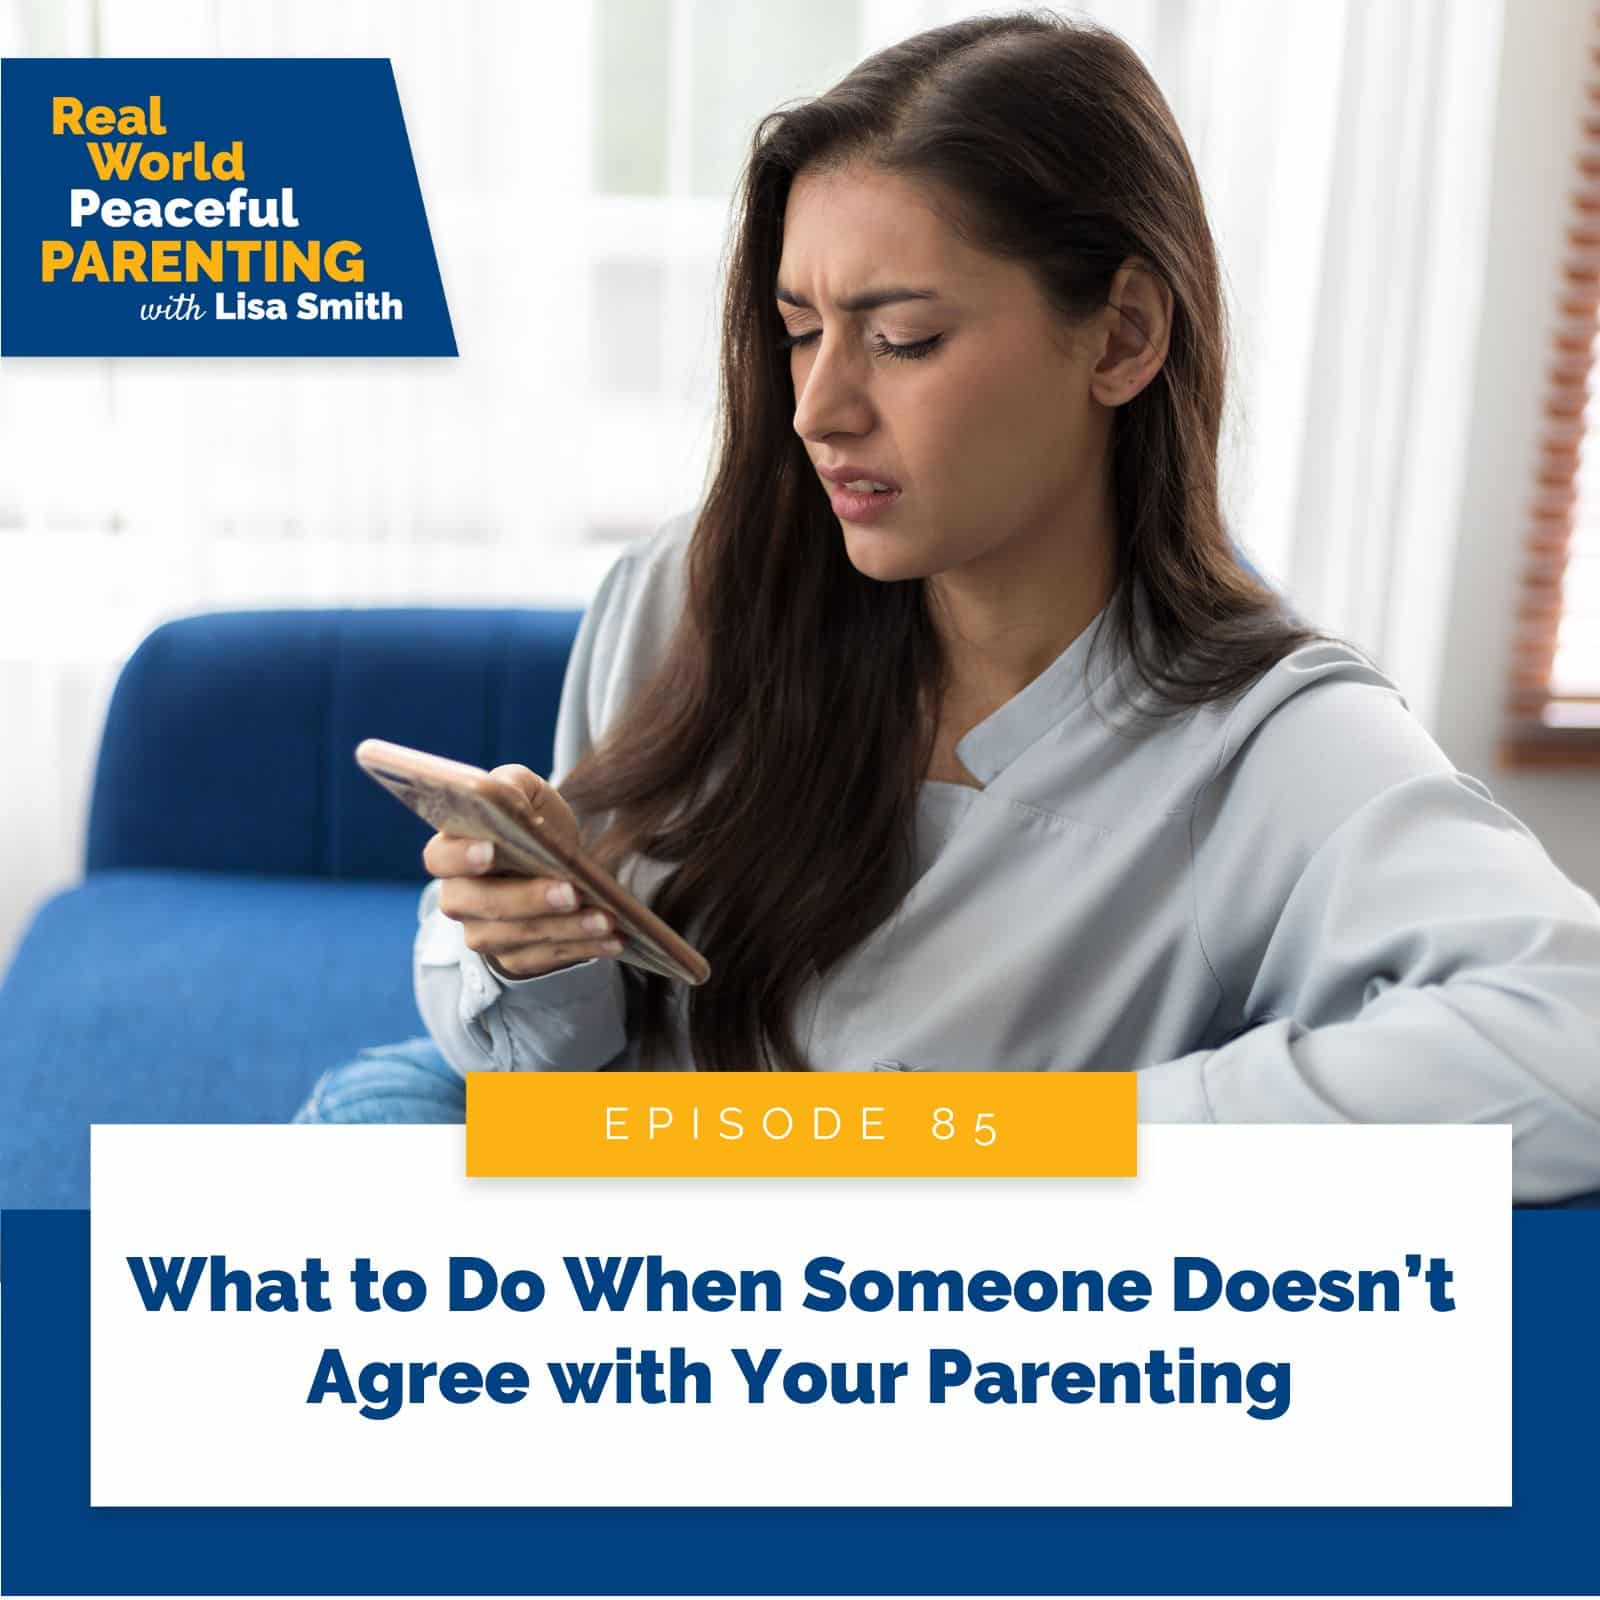 Real World Peaceful Parenting | What to Do When Someone Doesn’t Agree with Your Parenting